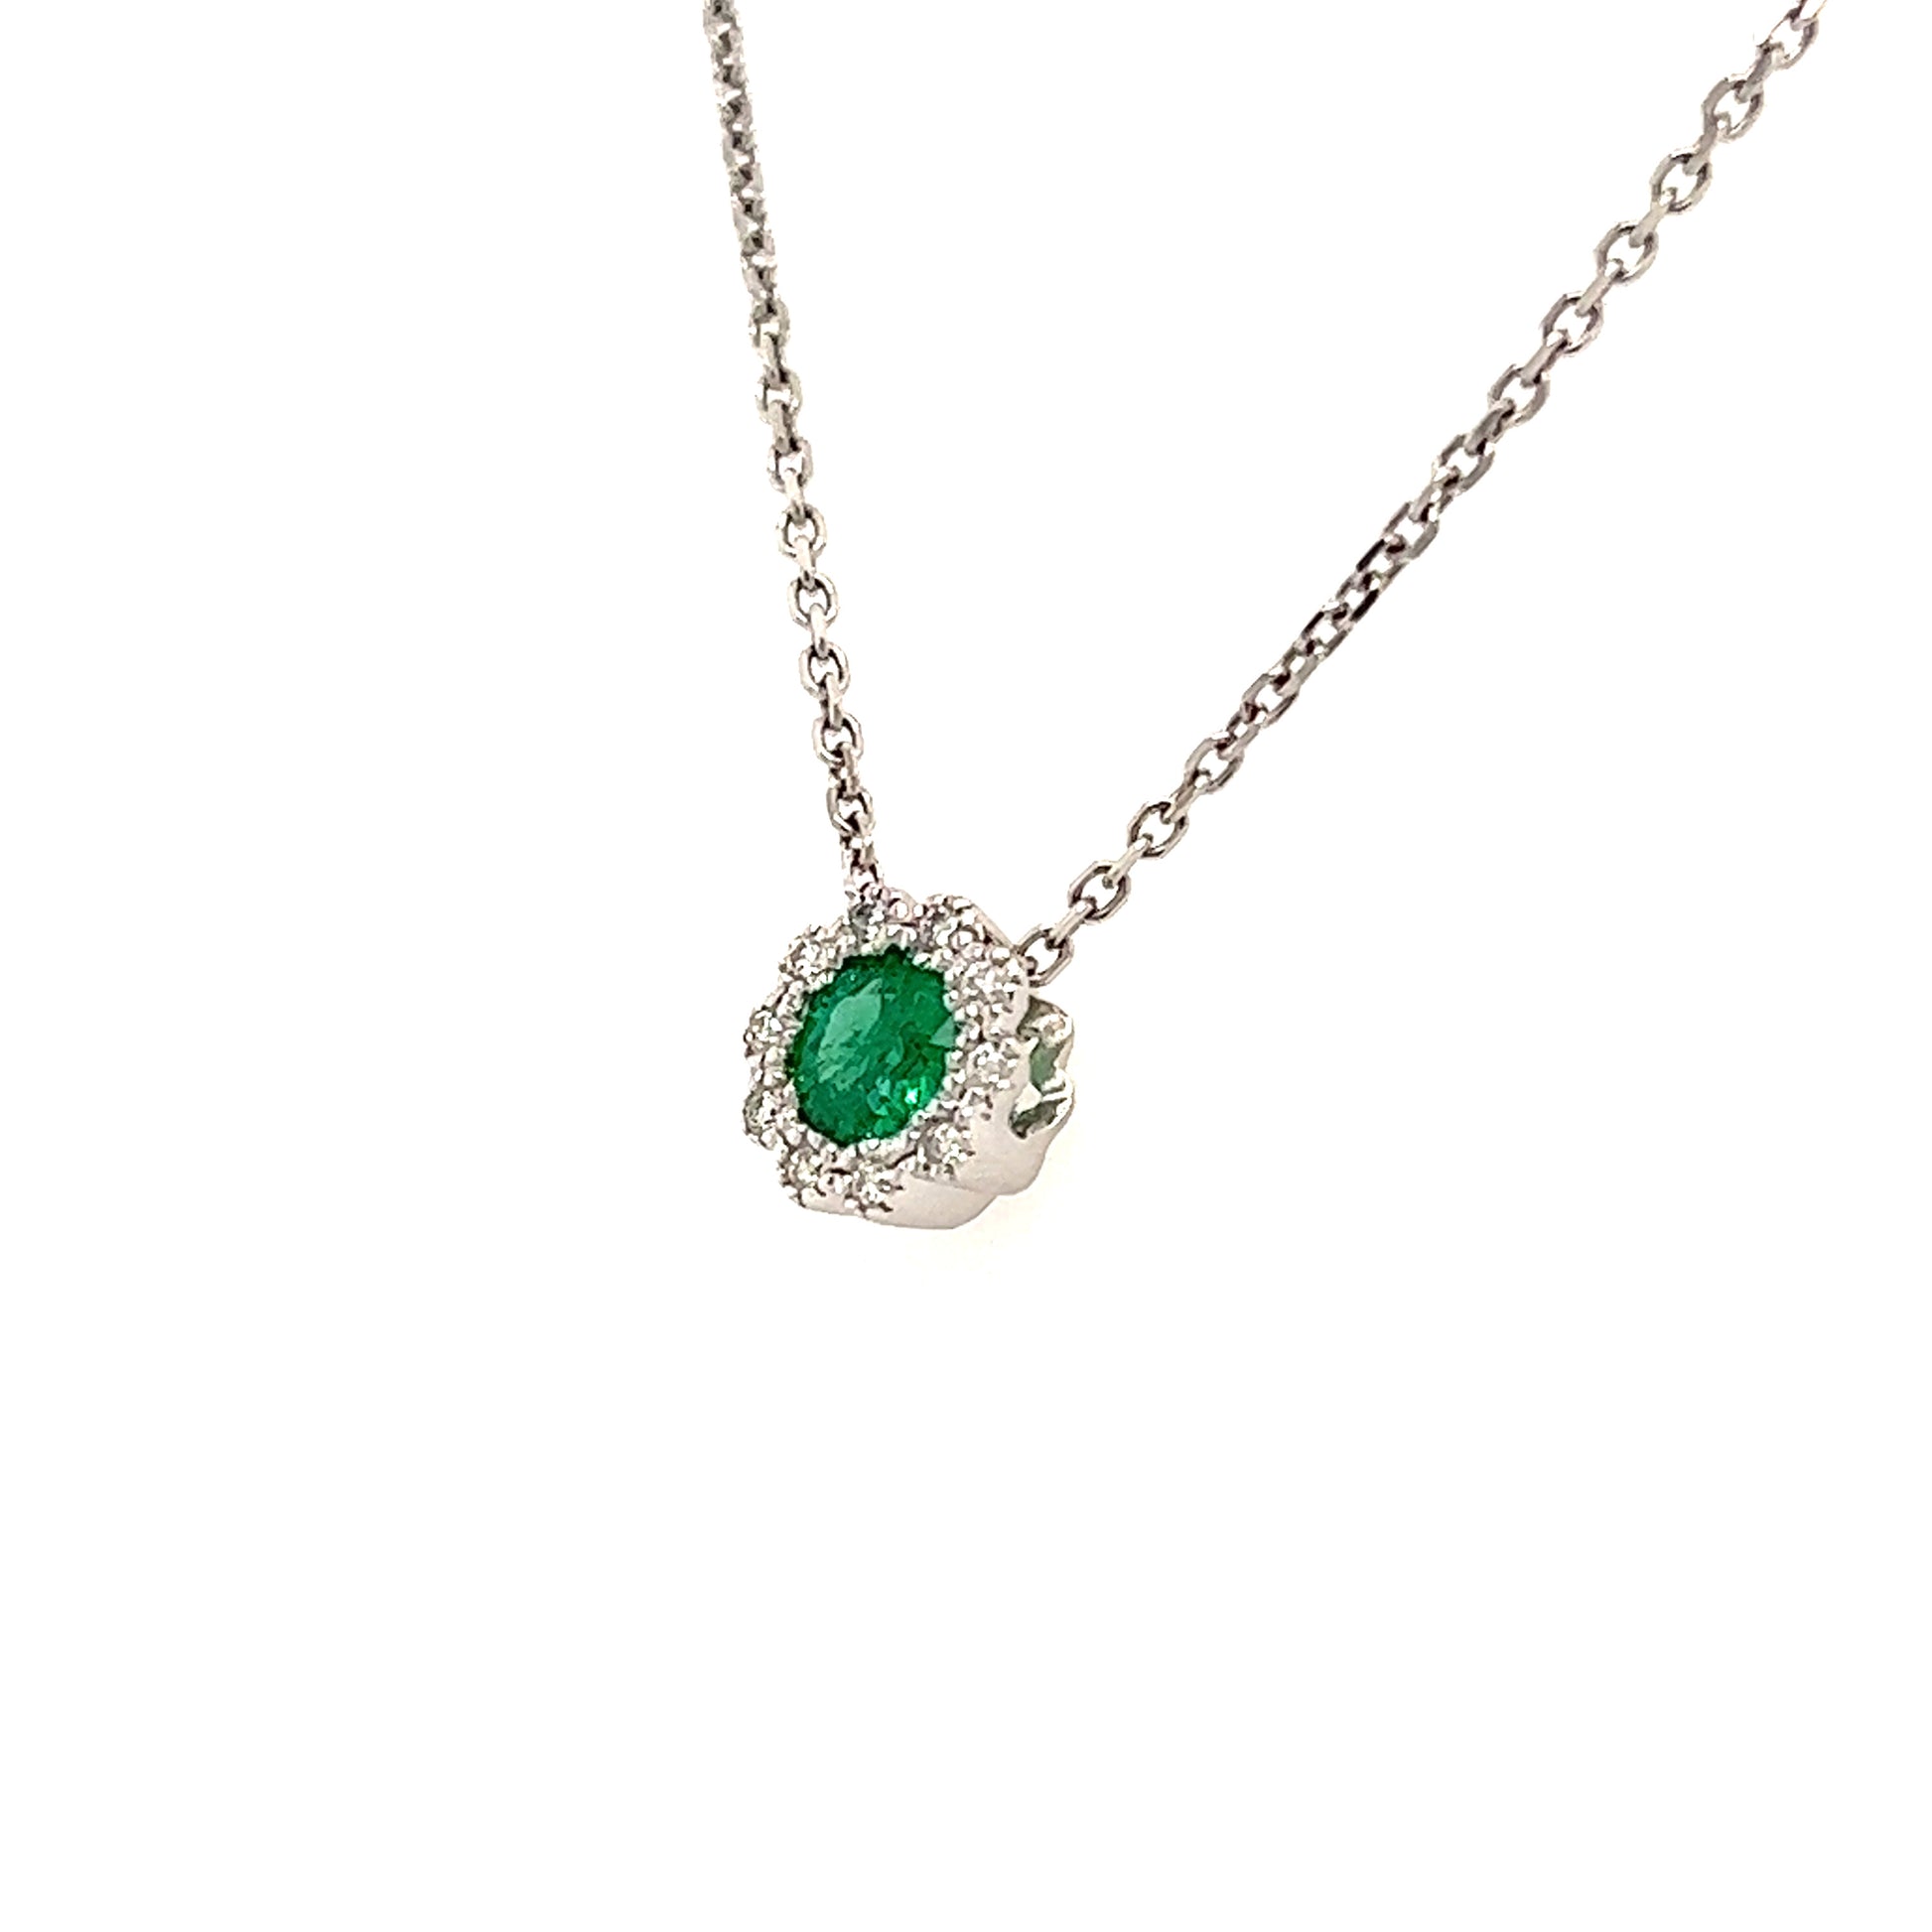 Floral Emerald Pendant with Diamond Halo in 14K White Gold Pendant and Chain Left Side View